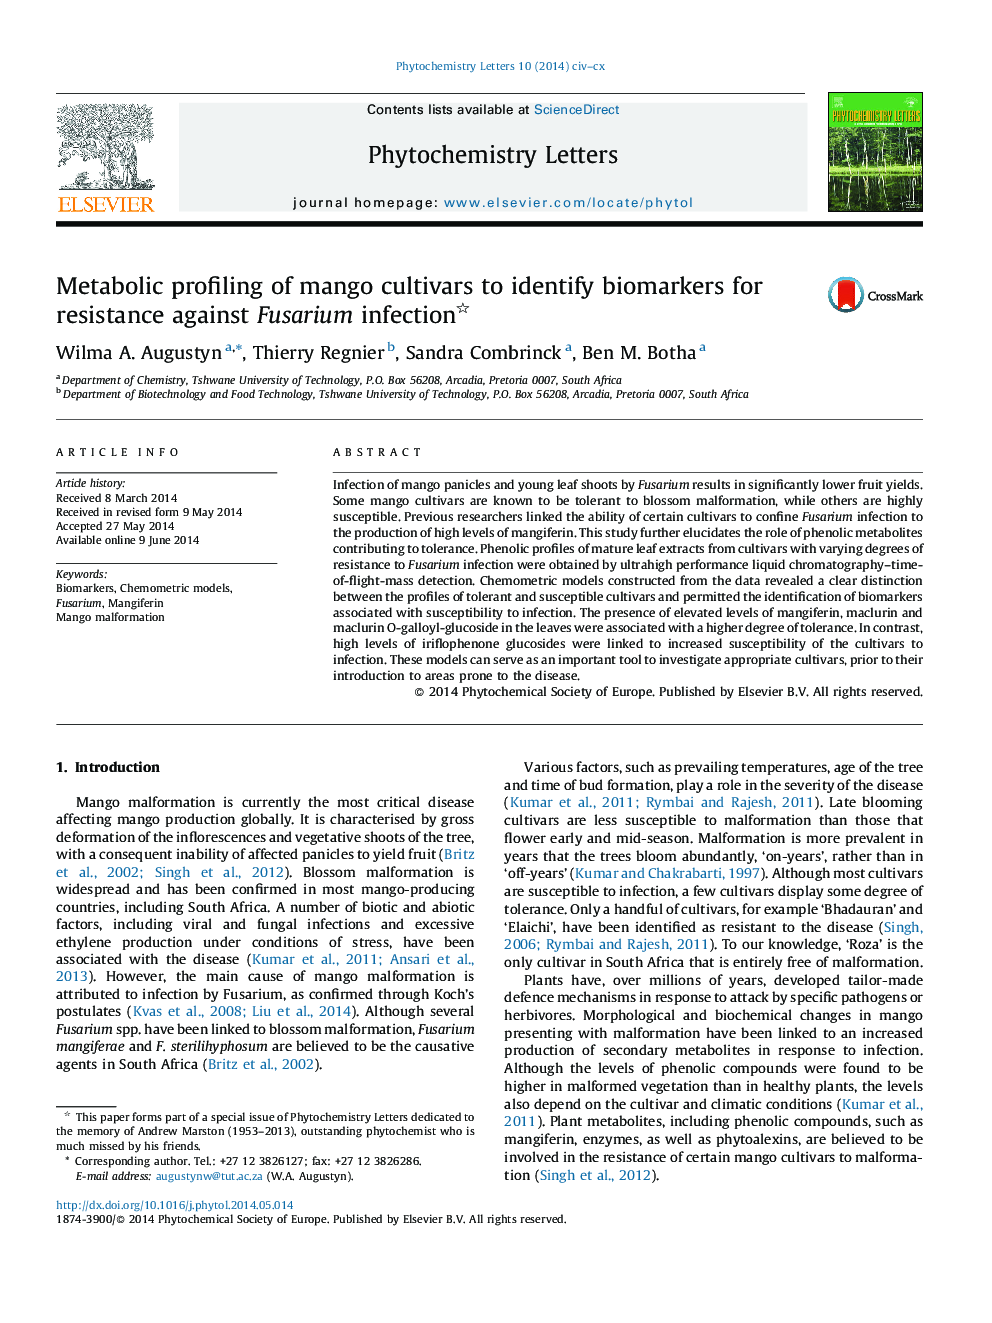 Metabolic profiling of mango cultivars to identify biomarkers for resistance against Fusarium infection